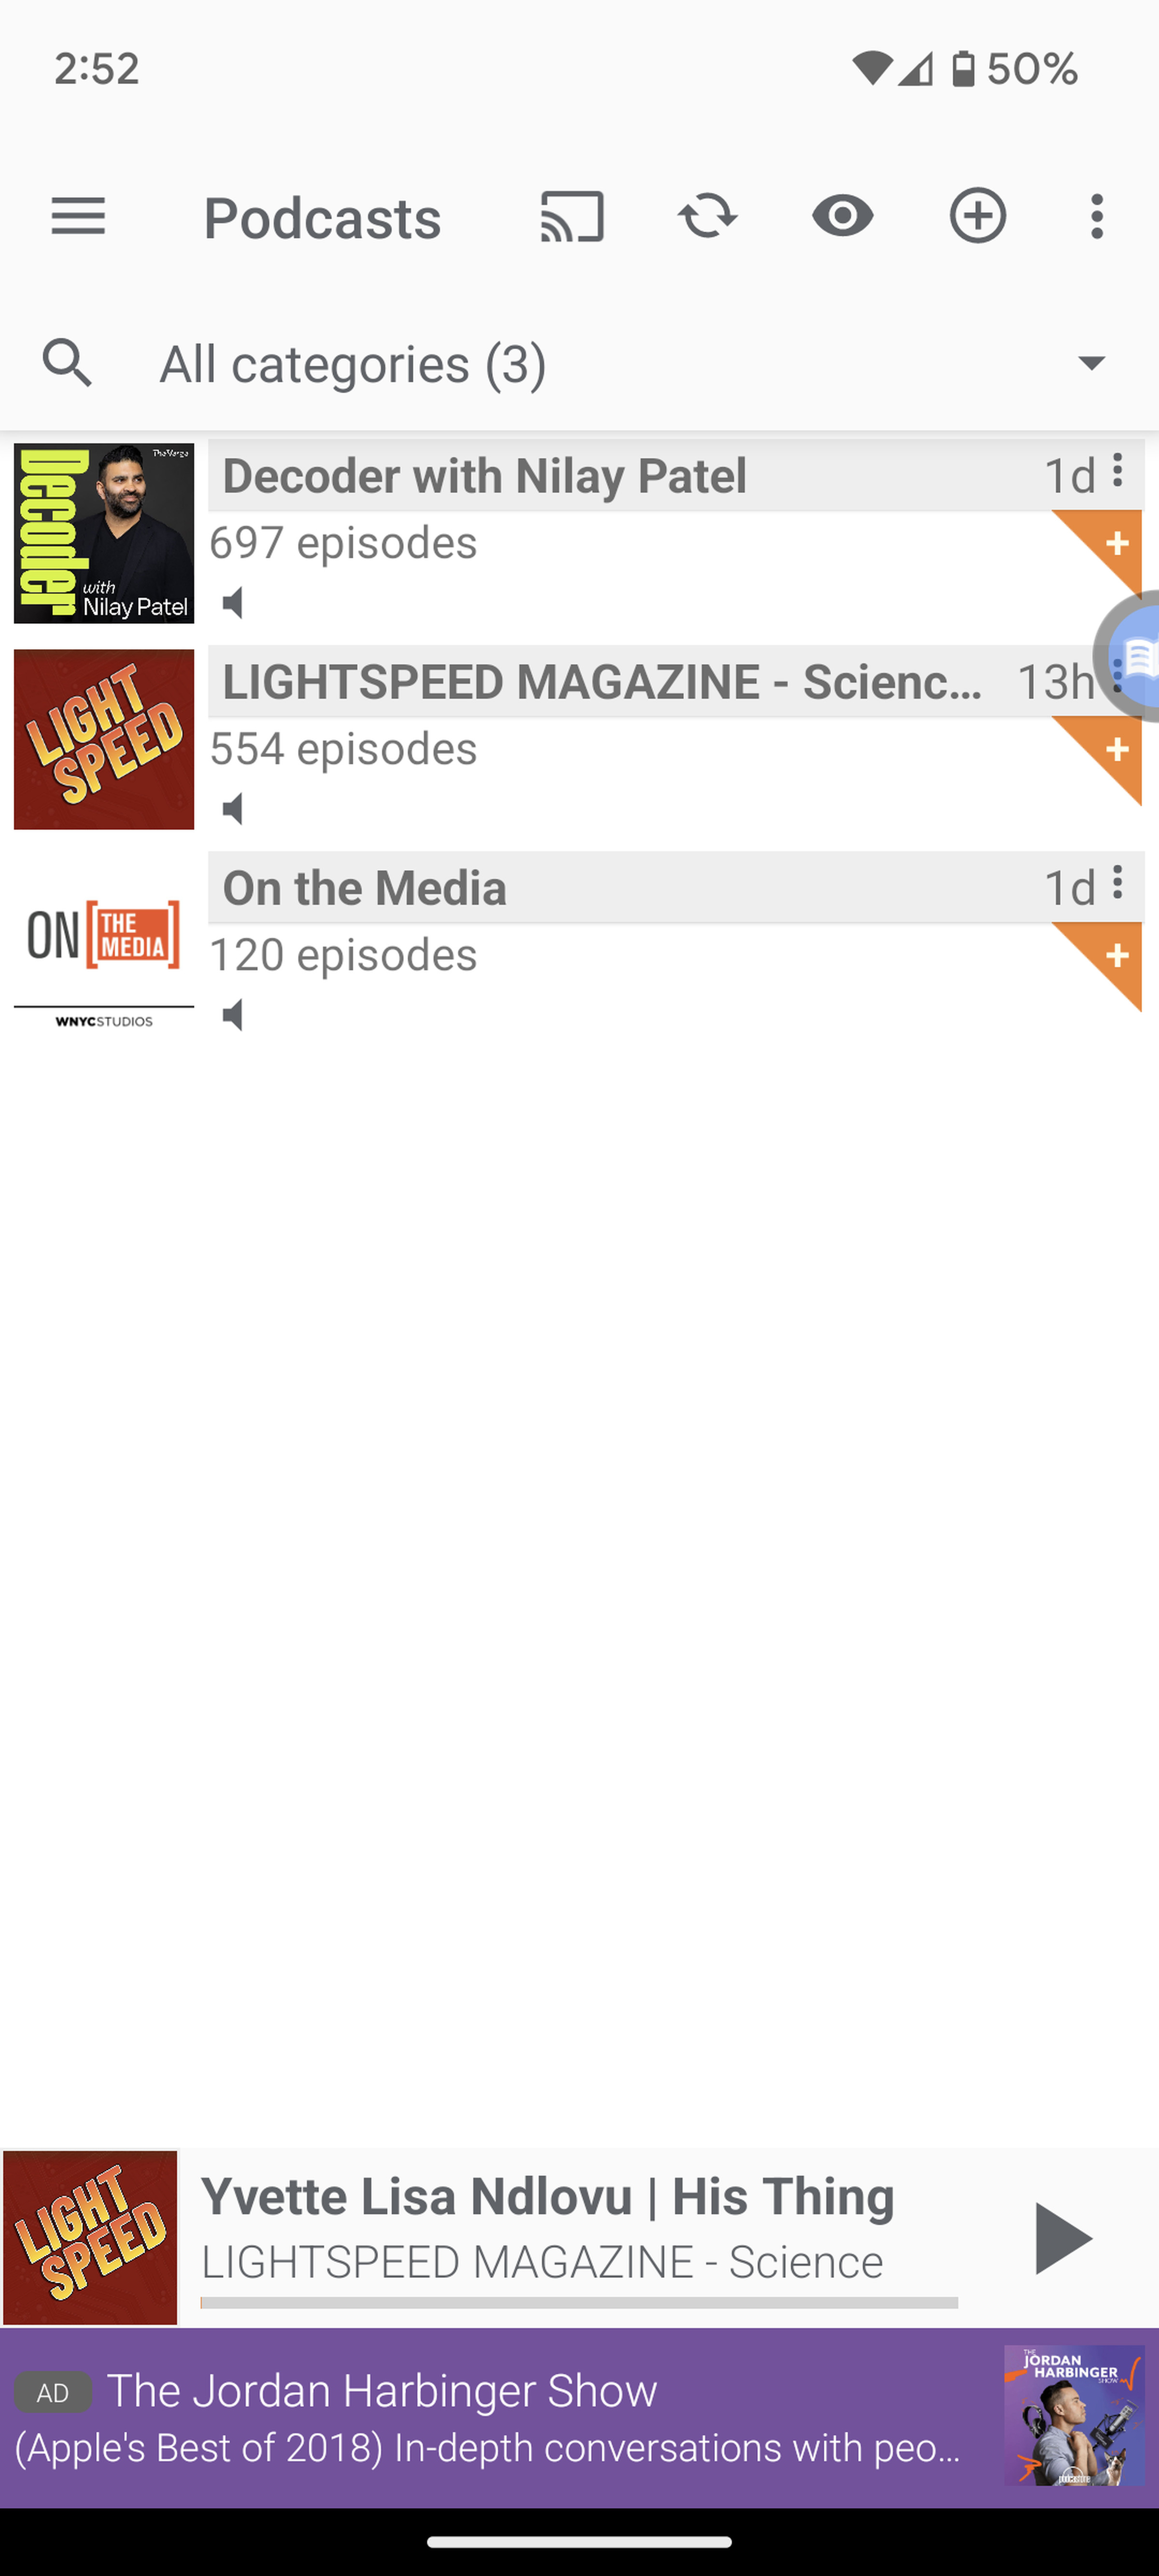 Page with Podcasts at top, along with several icons, three podcast covers below that, and a banner ad at bottom.